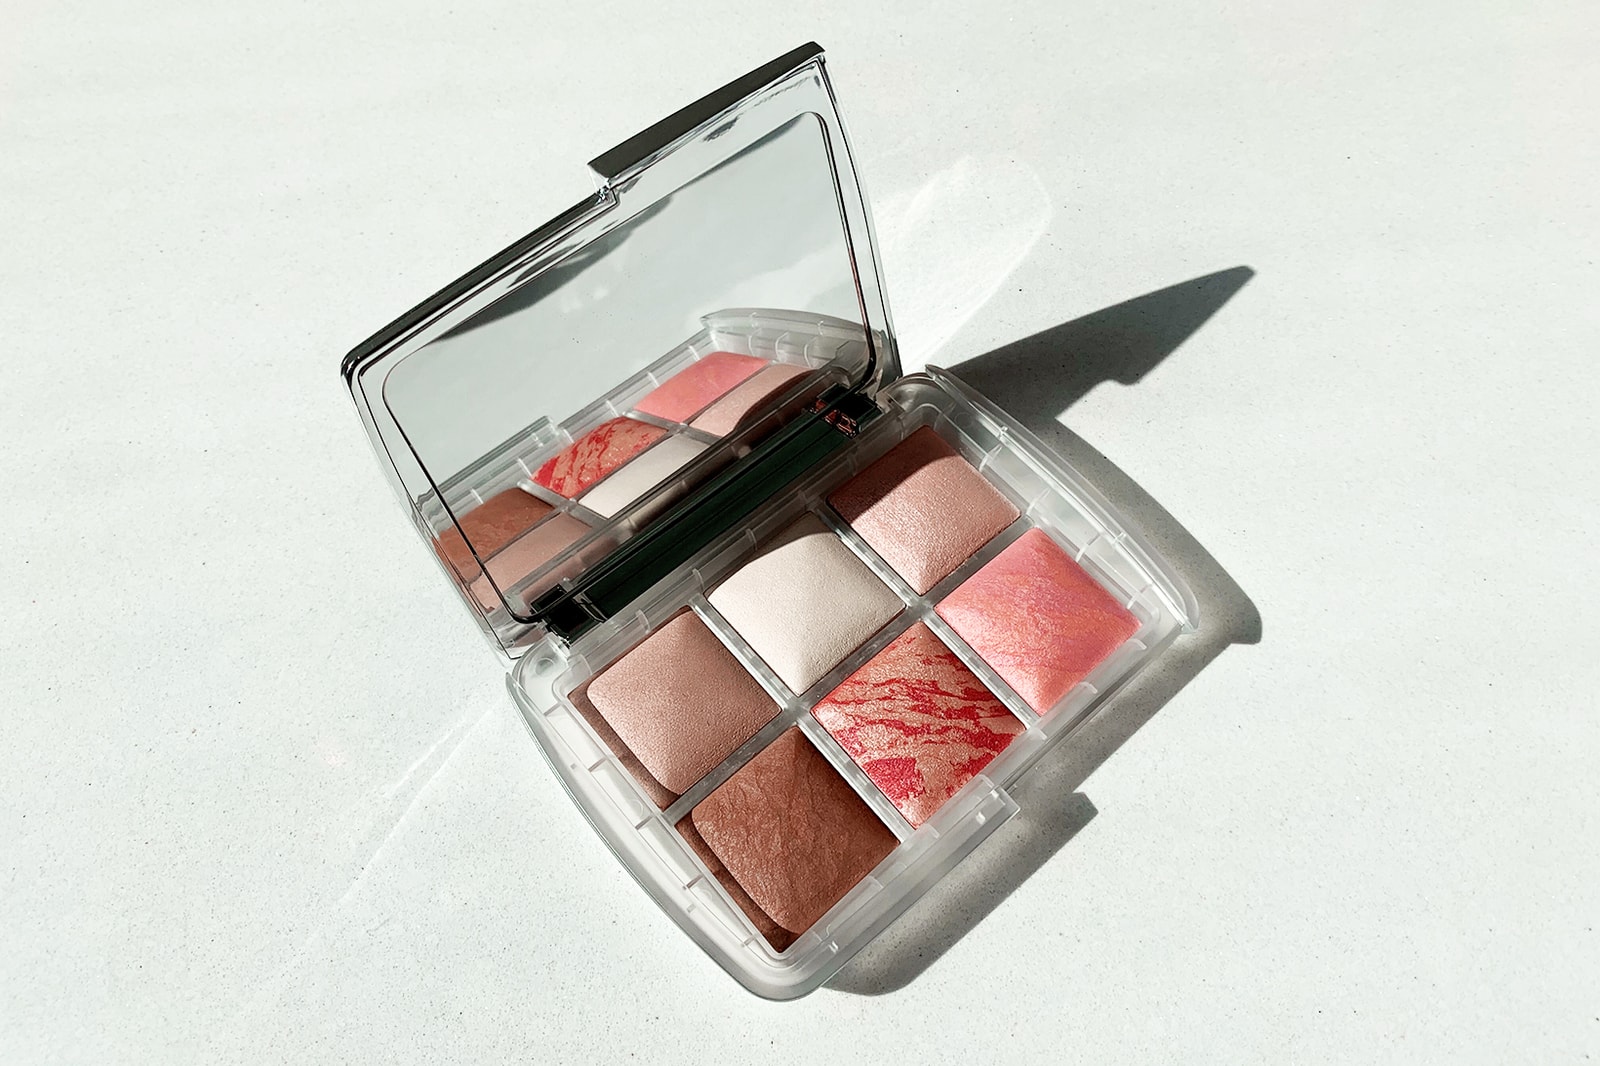 hourglass limited edition ambient lighting edit highlighter bronzer blush confession lipstick duo makeup beauty cosmetics 